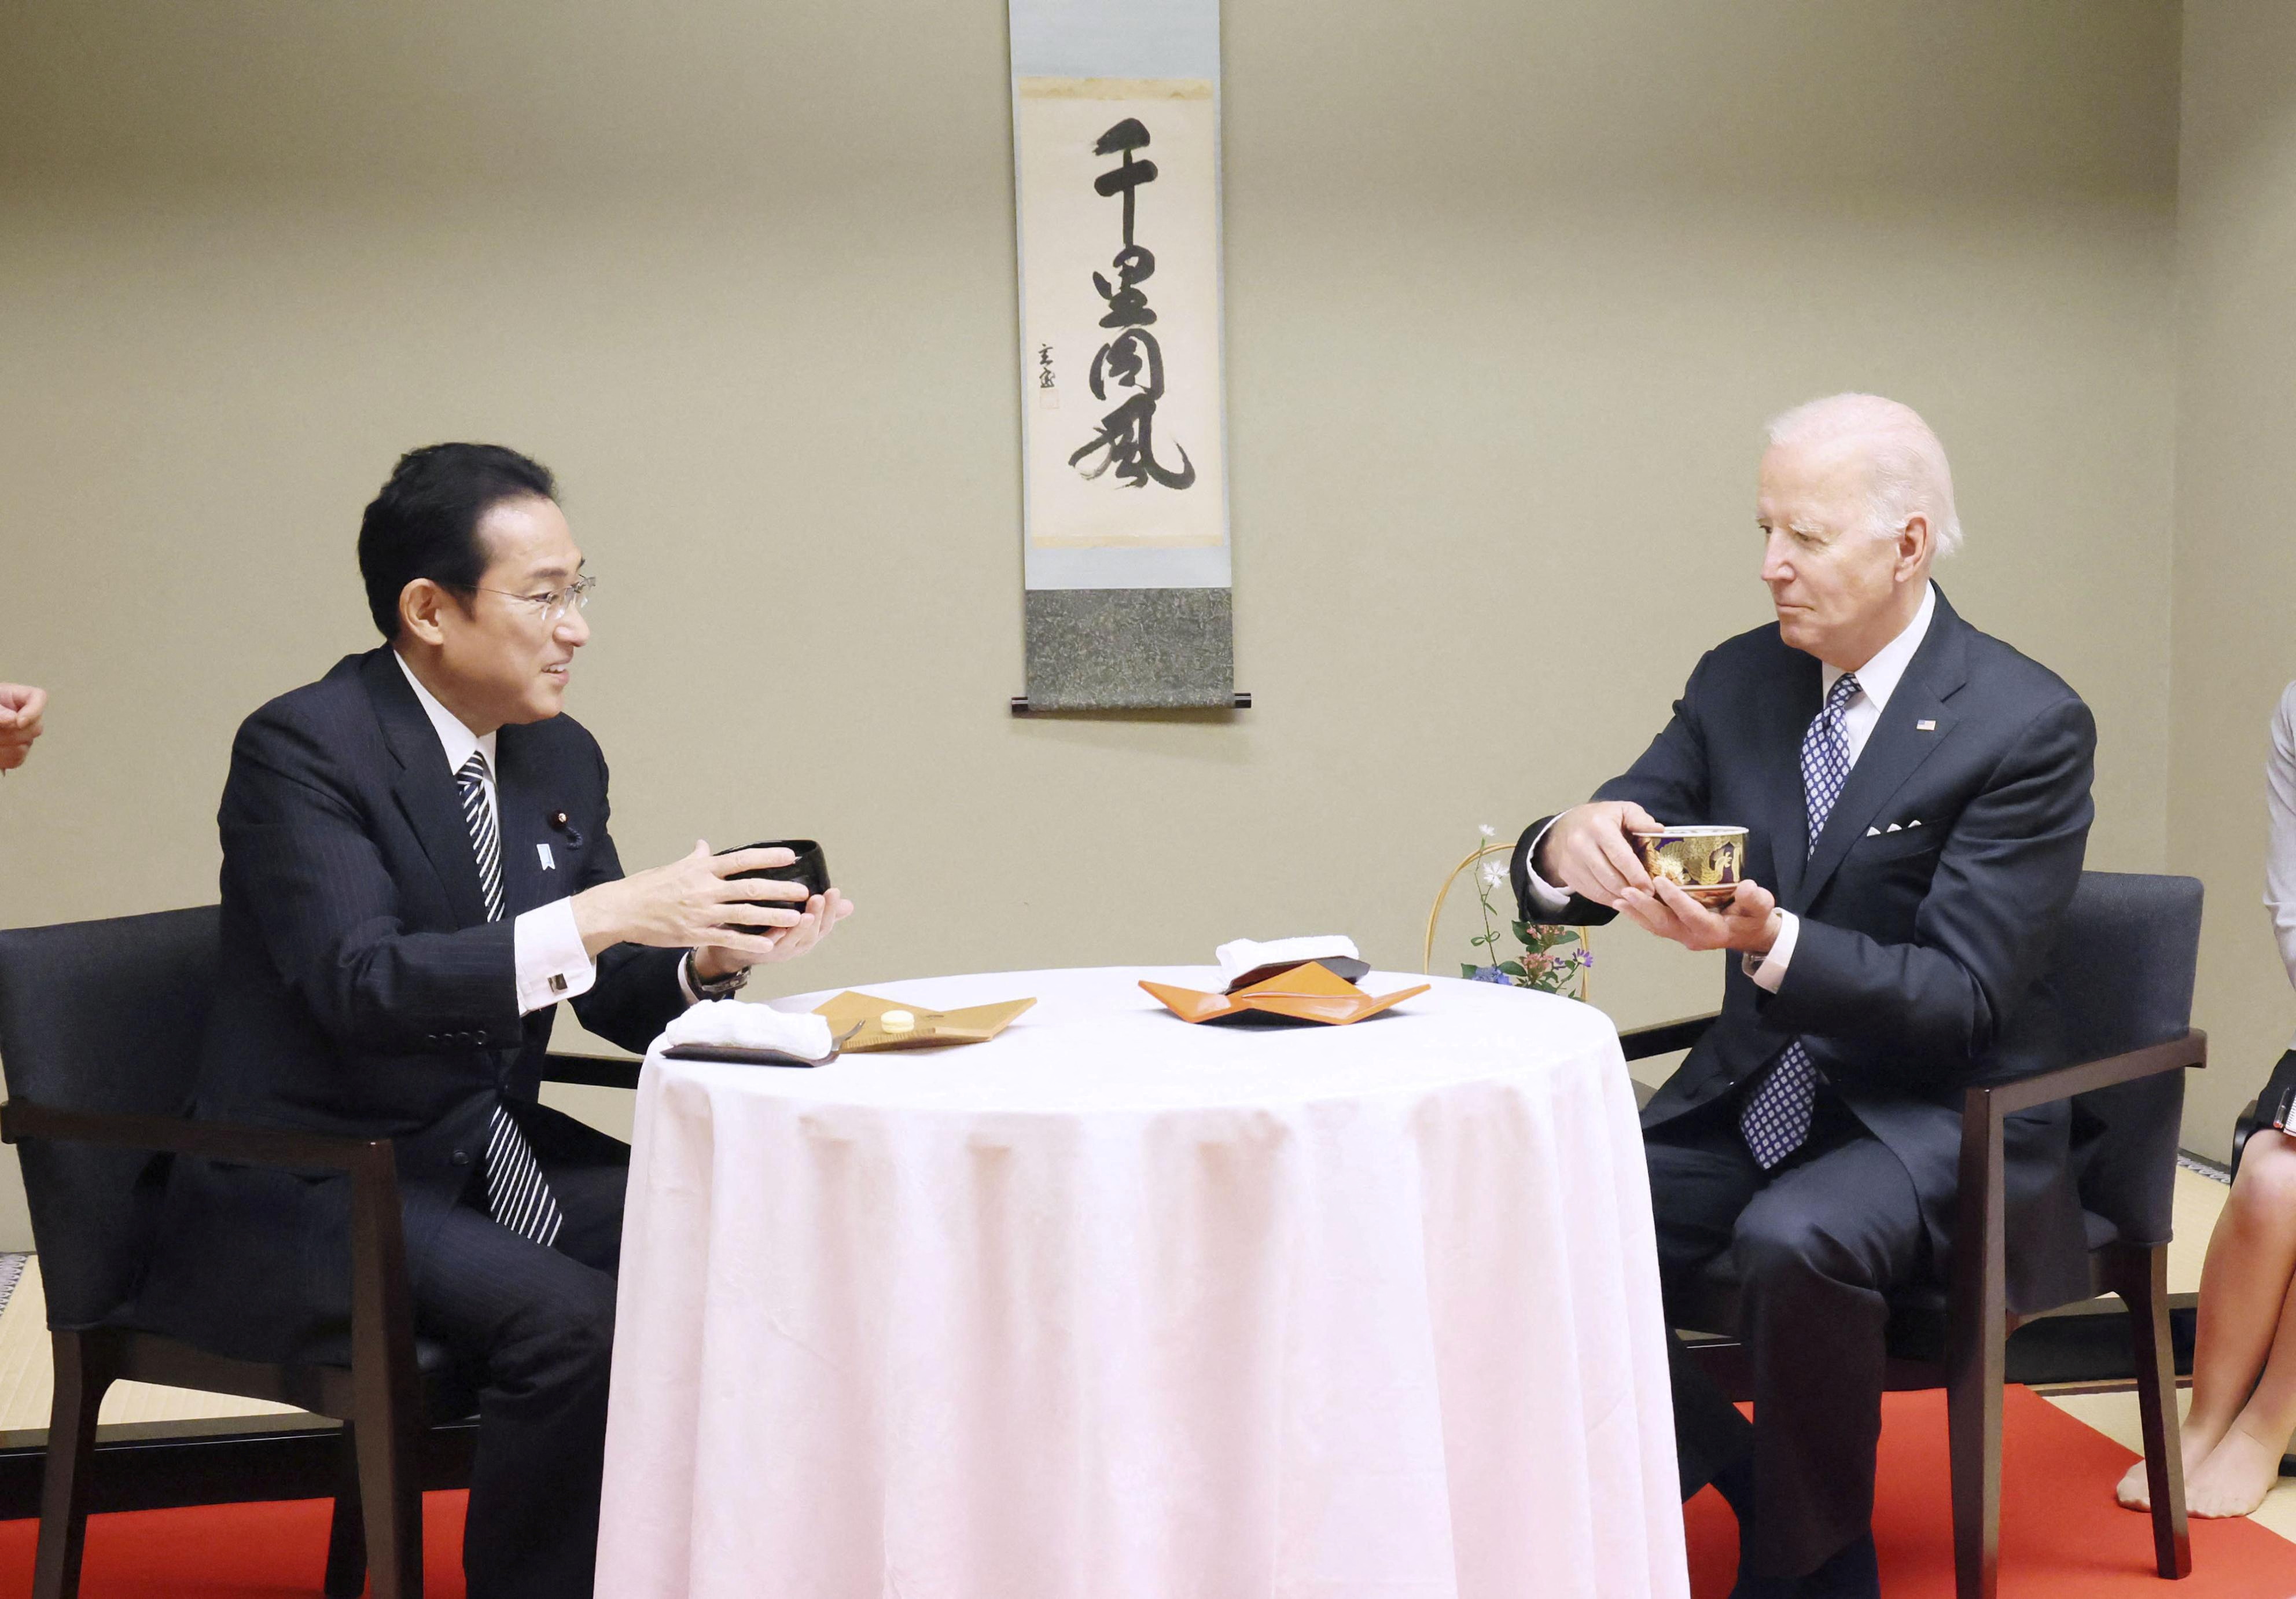 U.S. President Joe Biden experiences a traditional tea ceremony with Japan's Prime Minister Fumio Kishida during a private dinner in Tokyo